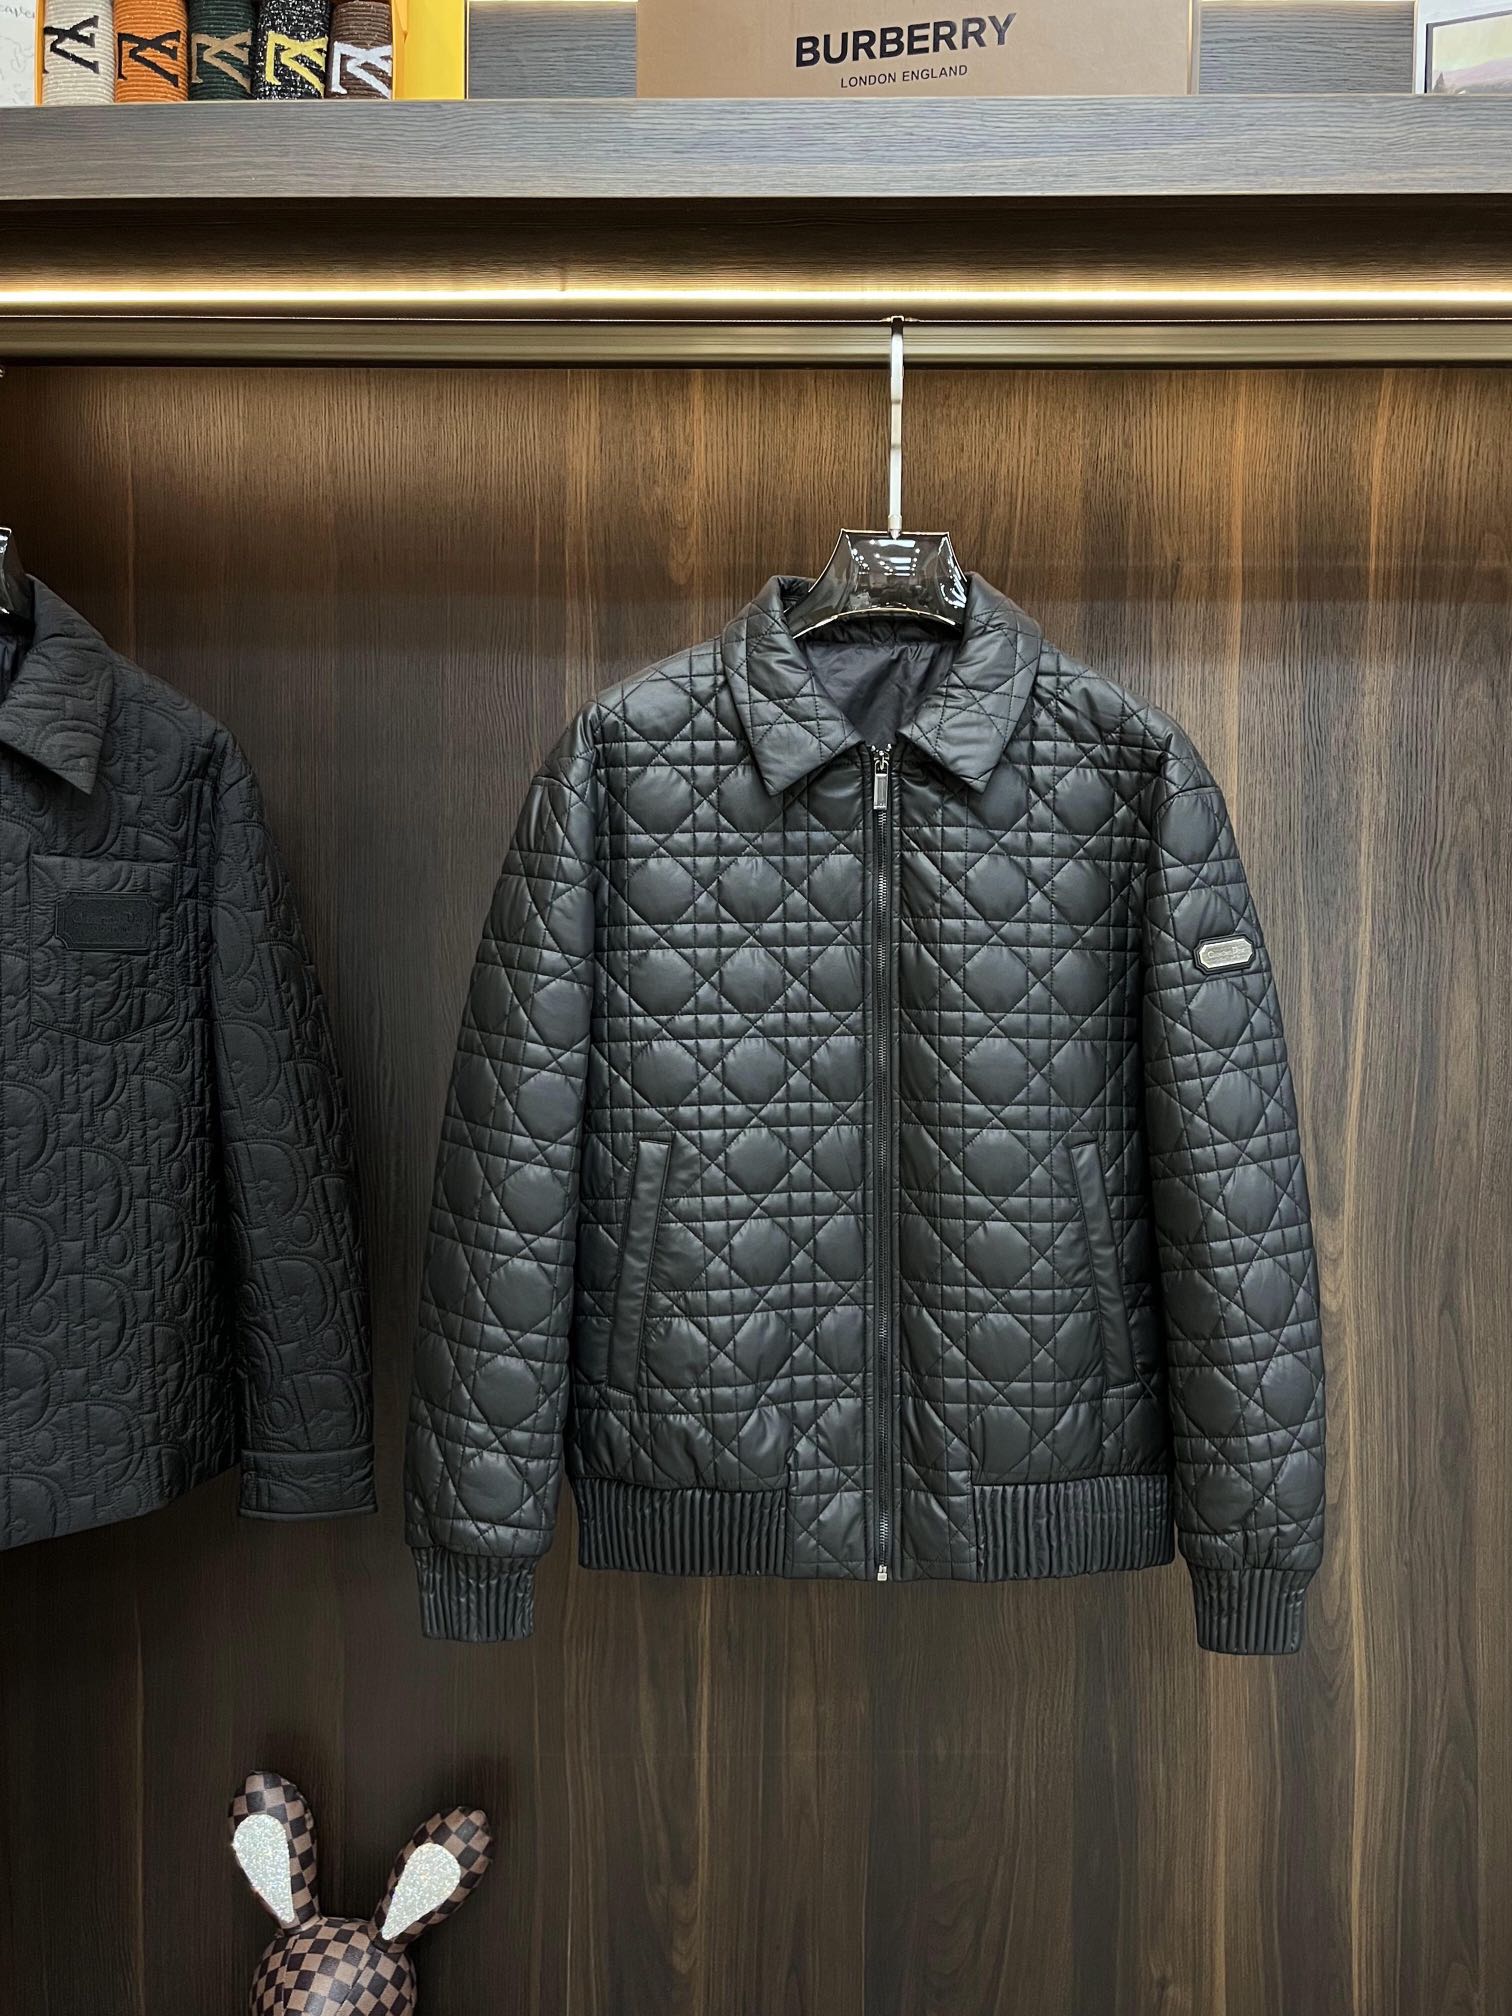 Dior Clothing Coats & Jackets Cotton Fall/Winter Collection